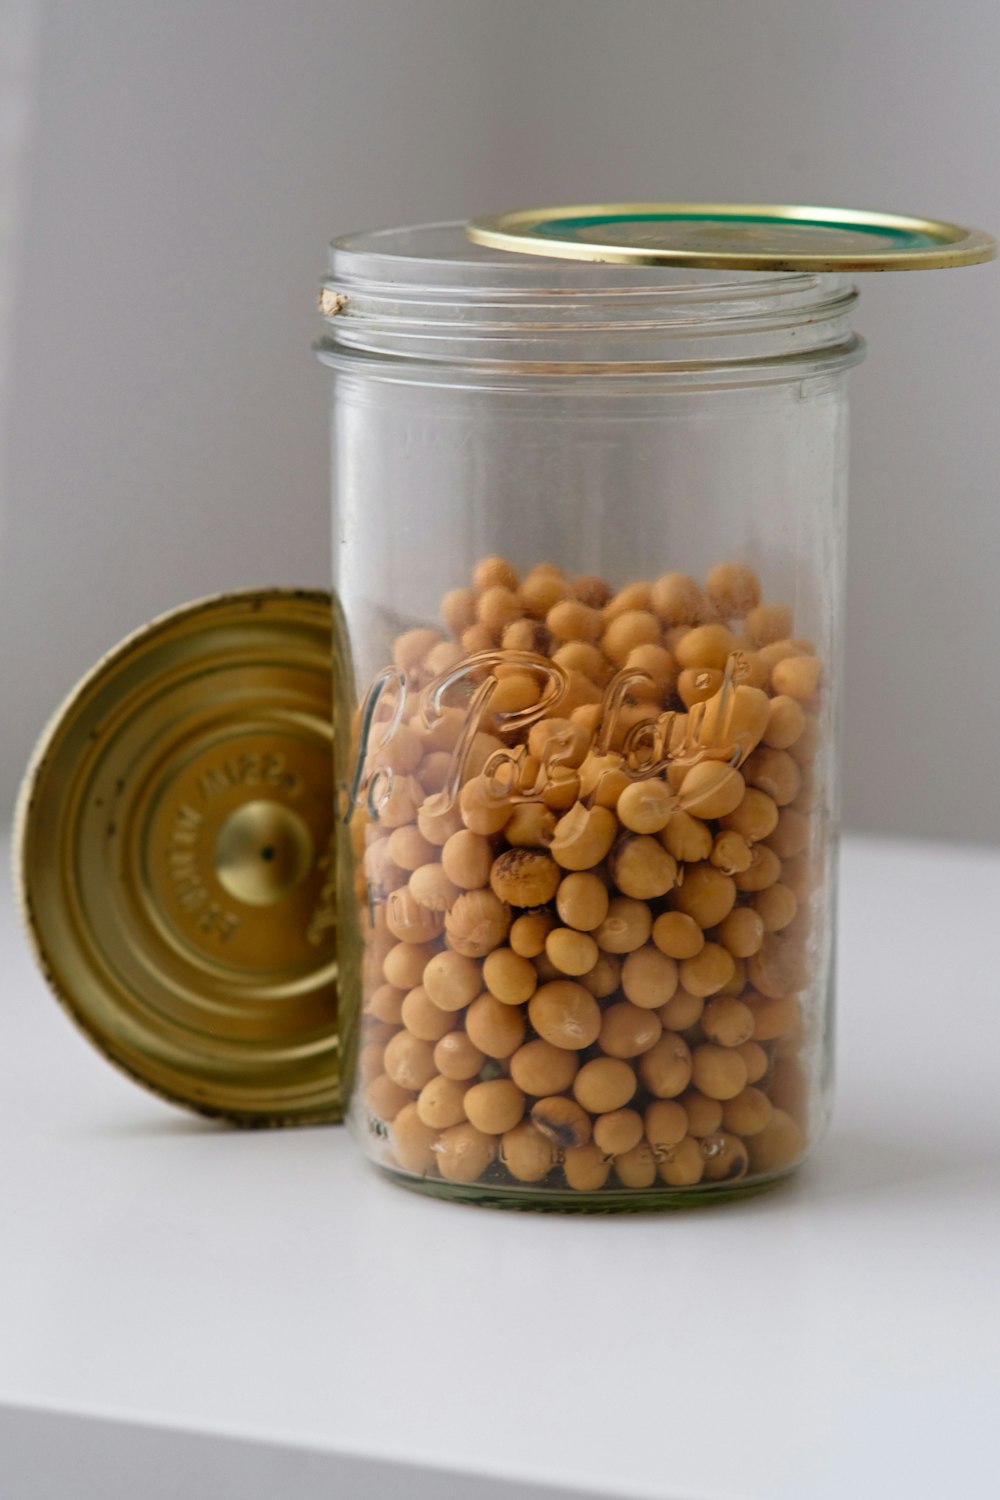 a glass jar filled with yellow and brown beans